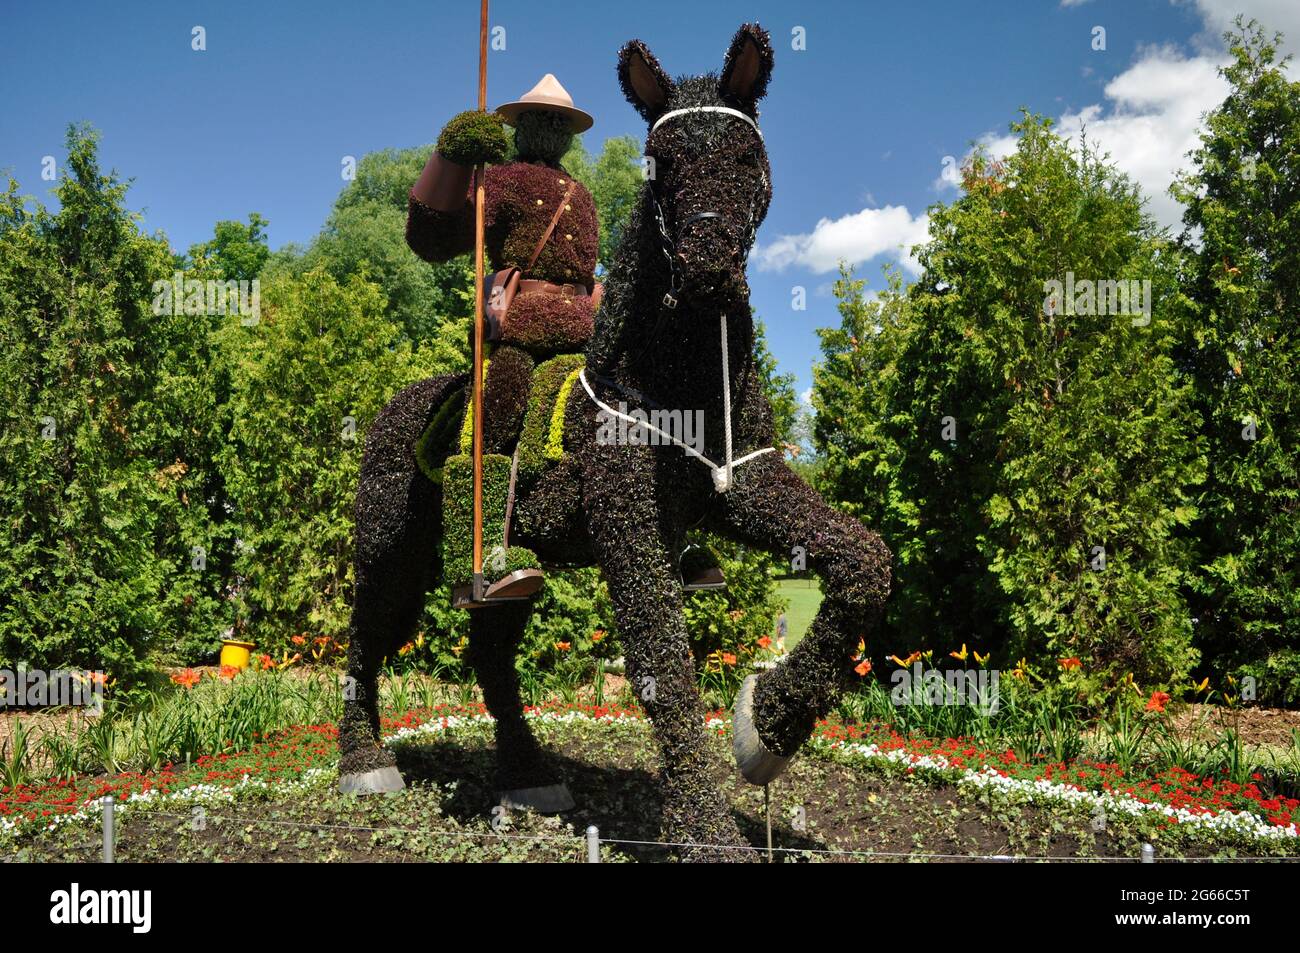 A Royal Canadian Mounted Police Officer (RCMP officer) on his mount, a famous Canadian icon, in topiary, Ontario, Canada. Like IRL. Lifesize,. Stock Photo